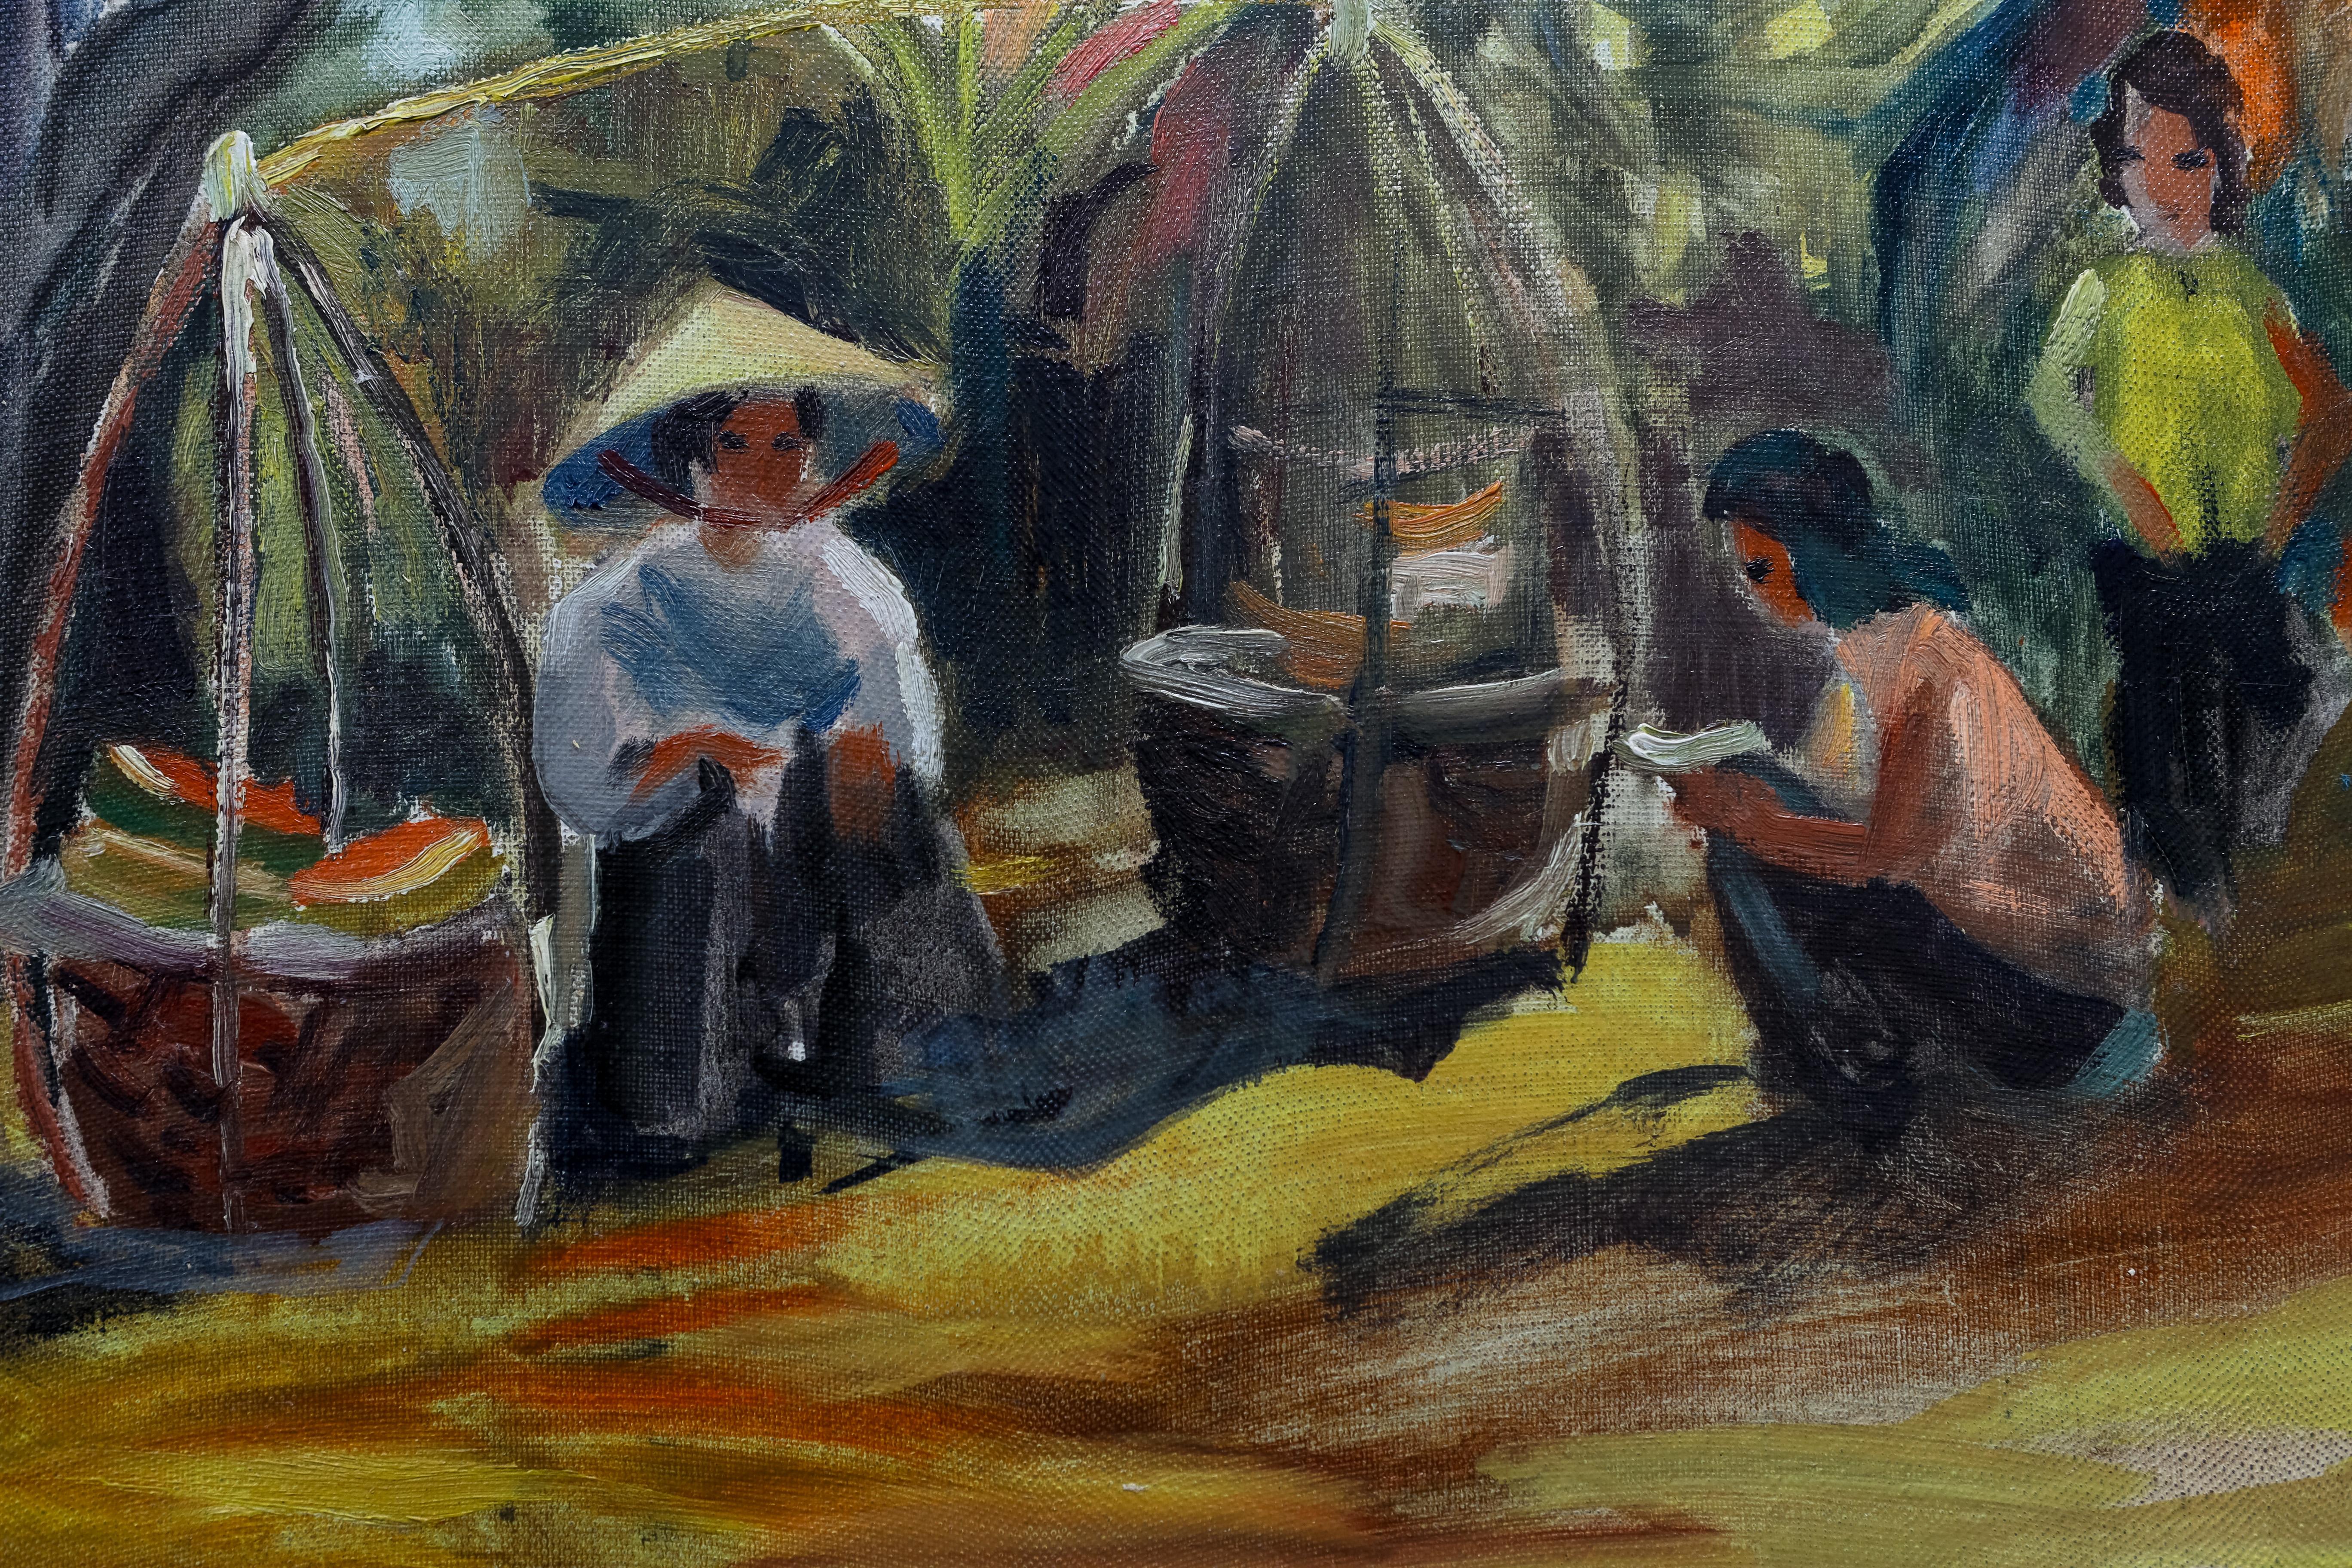 J Buttin was a French artist who lived in Indochina. This painting shows water carrier women under banana leaves. It is signed.. The painting has been recently cleaned by a professional. Please note the painting will be shipped from France and in